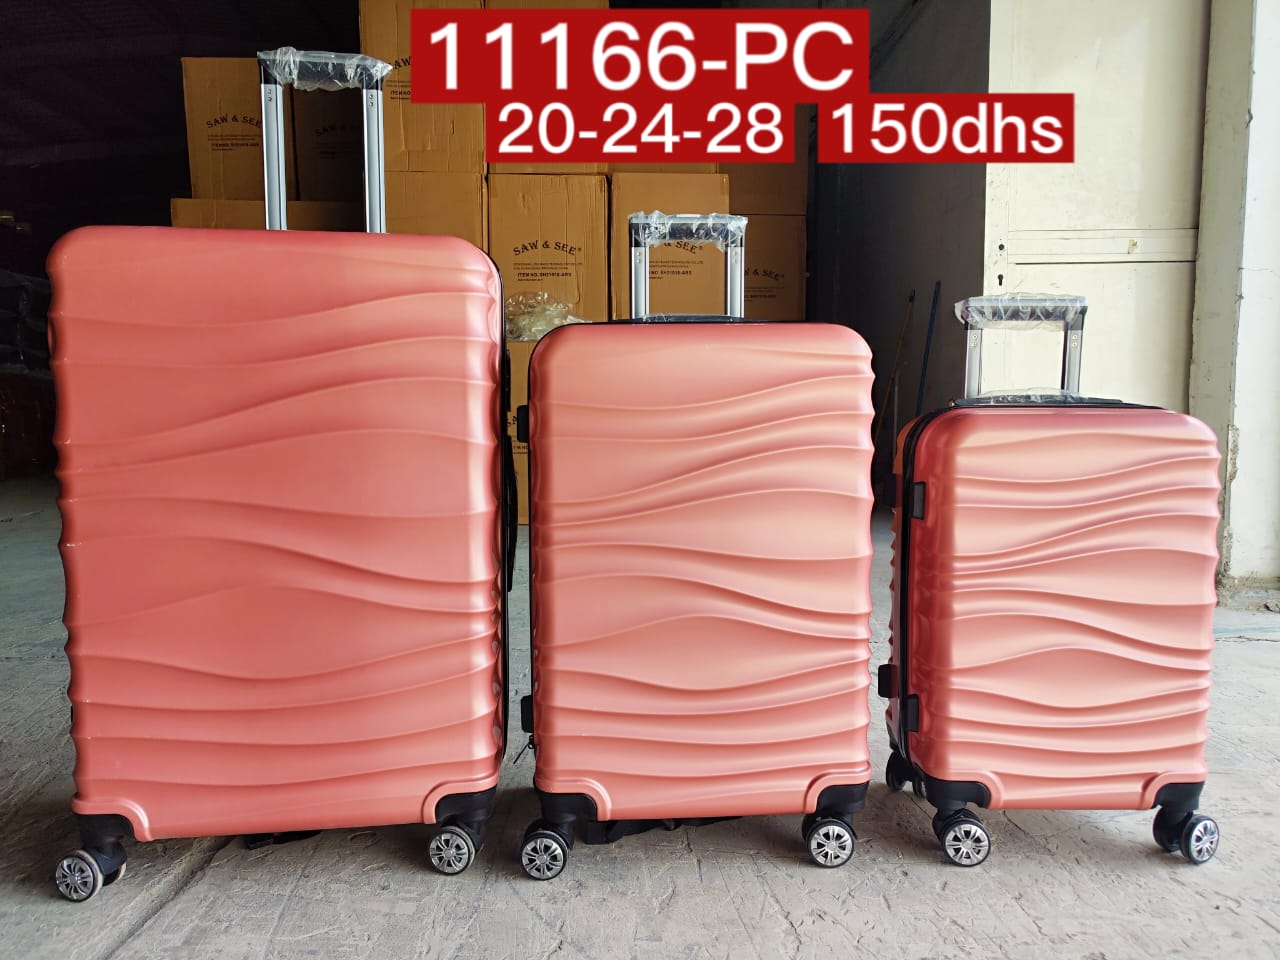 11166-PC ABS Luggage Sets